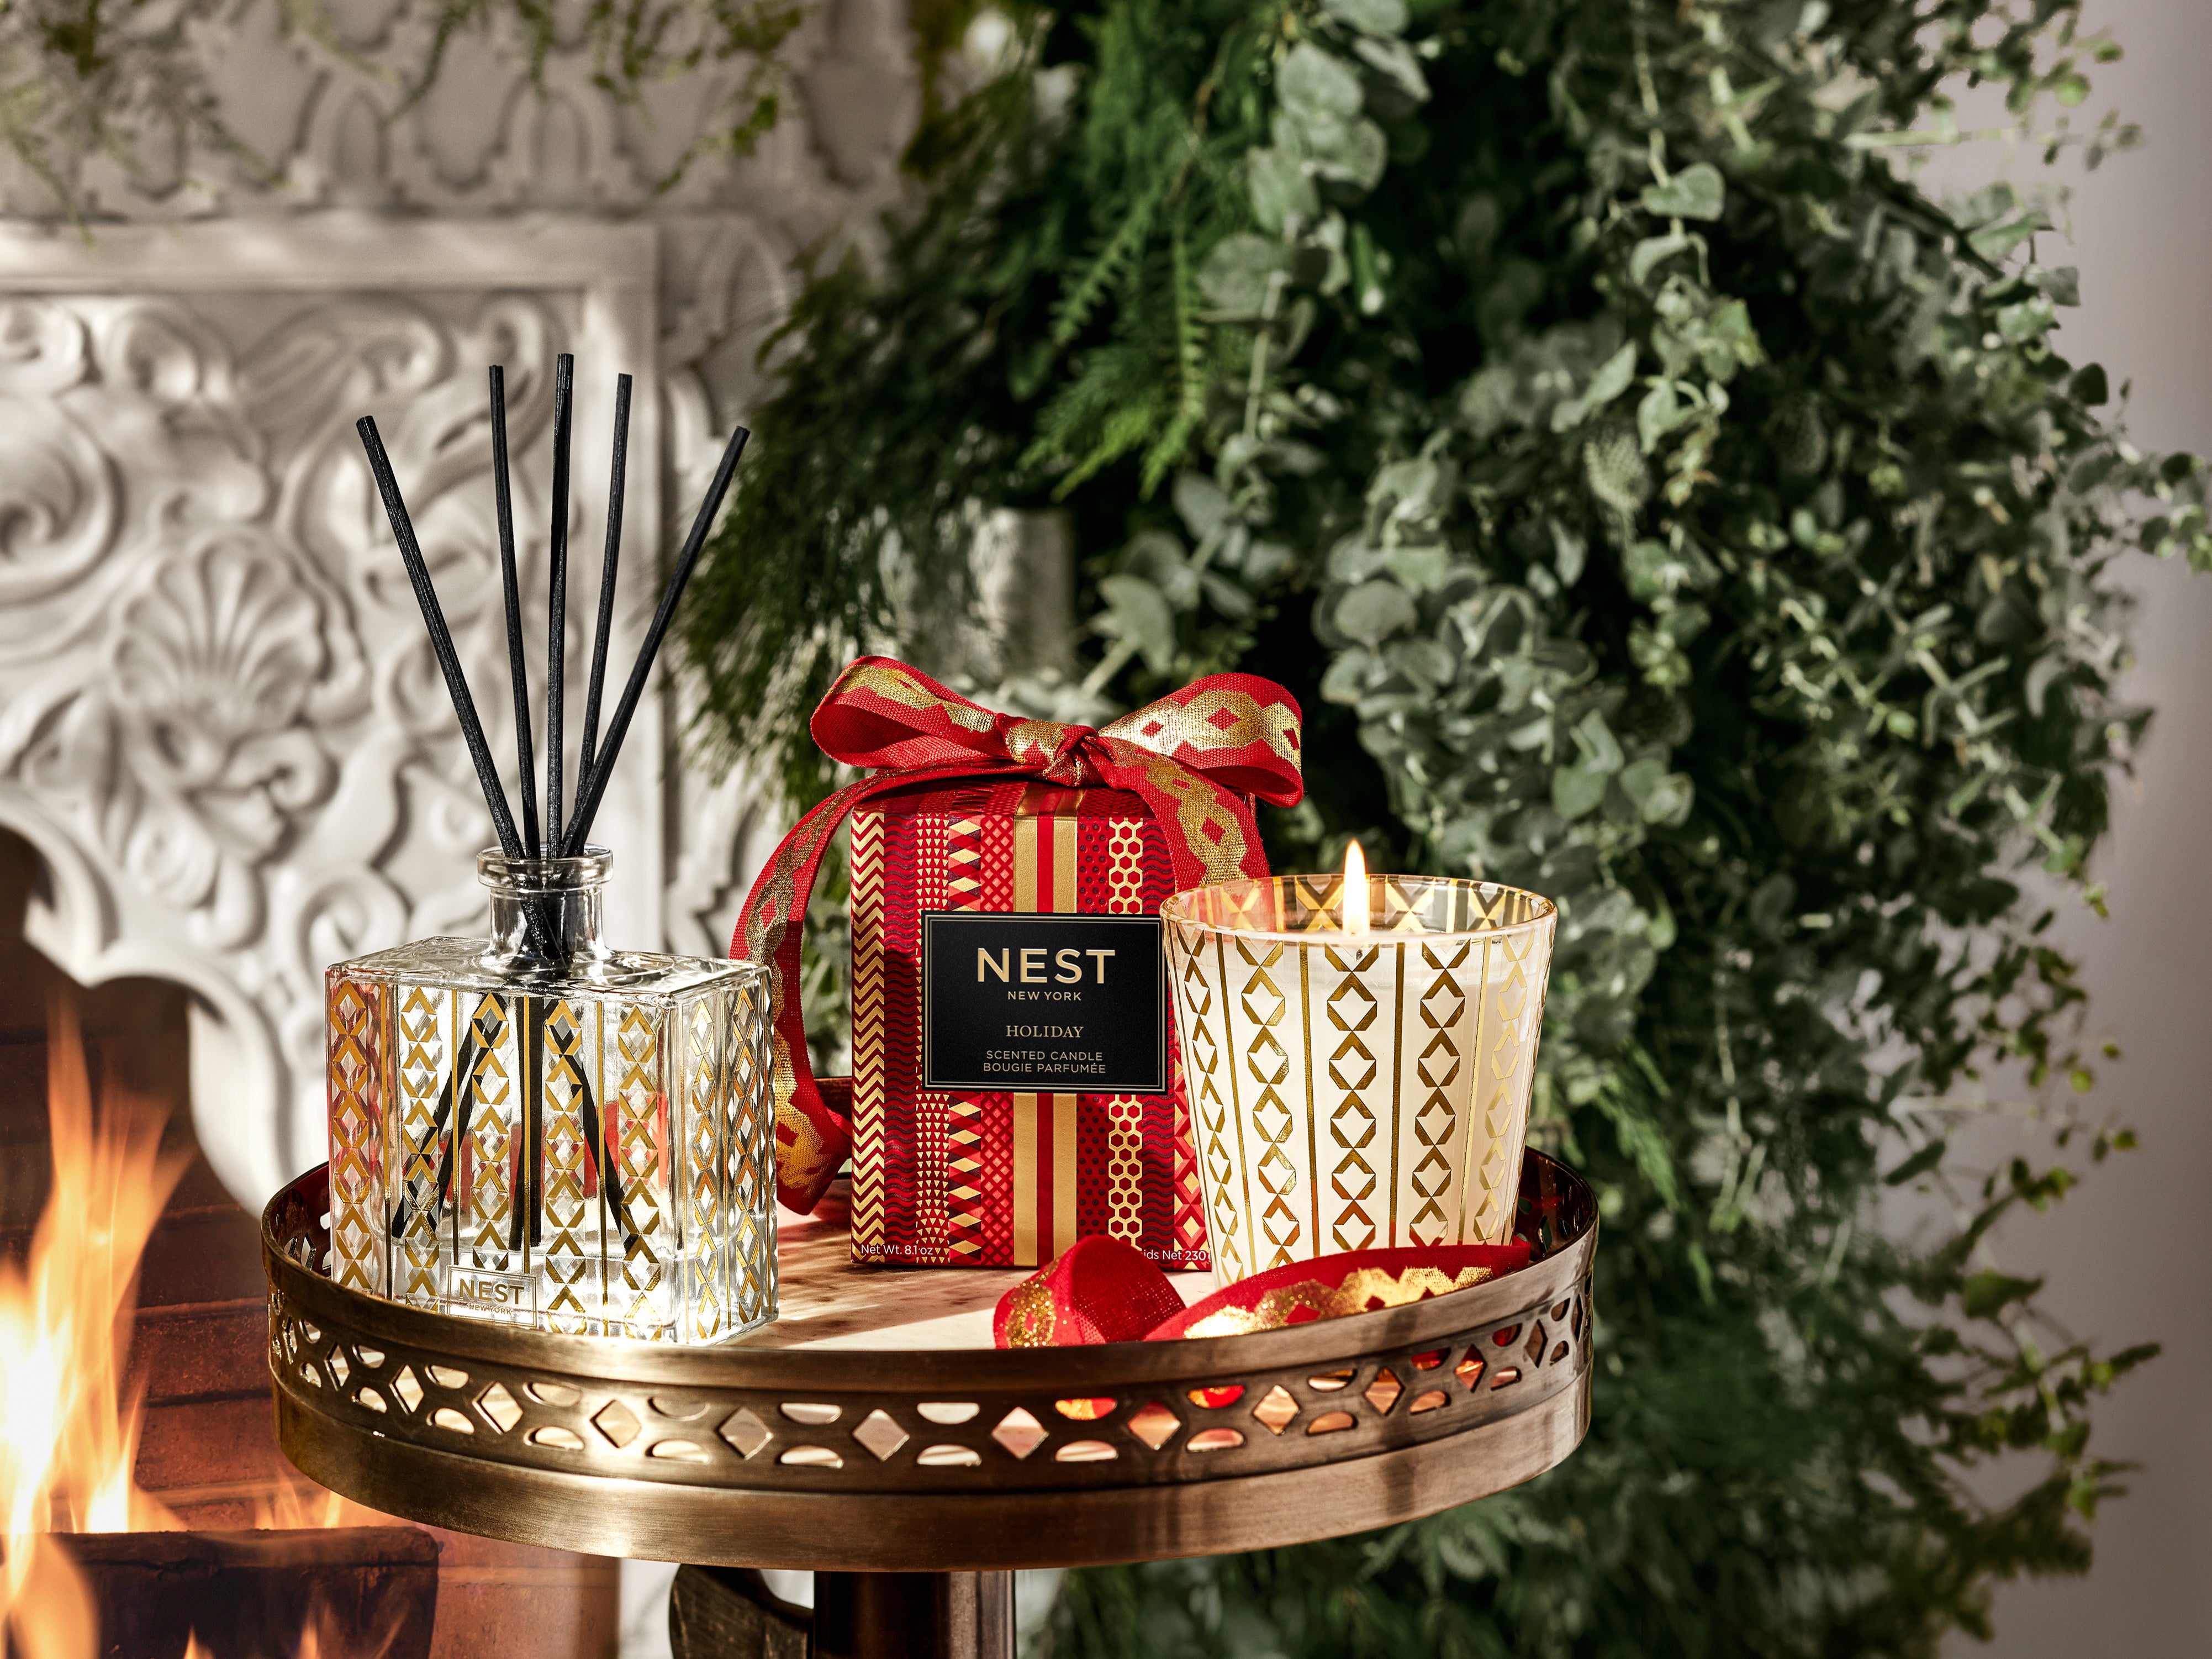 Nest ‘Holiday’ Candle gives off whiffs of pomegranate, mandarin orange, pine, cloves, and cinnamon